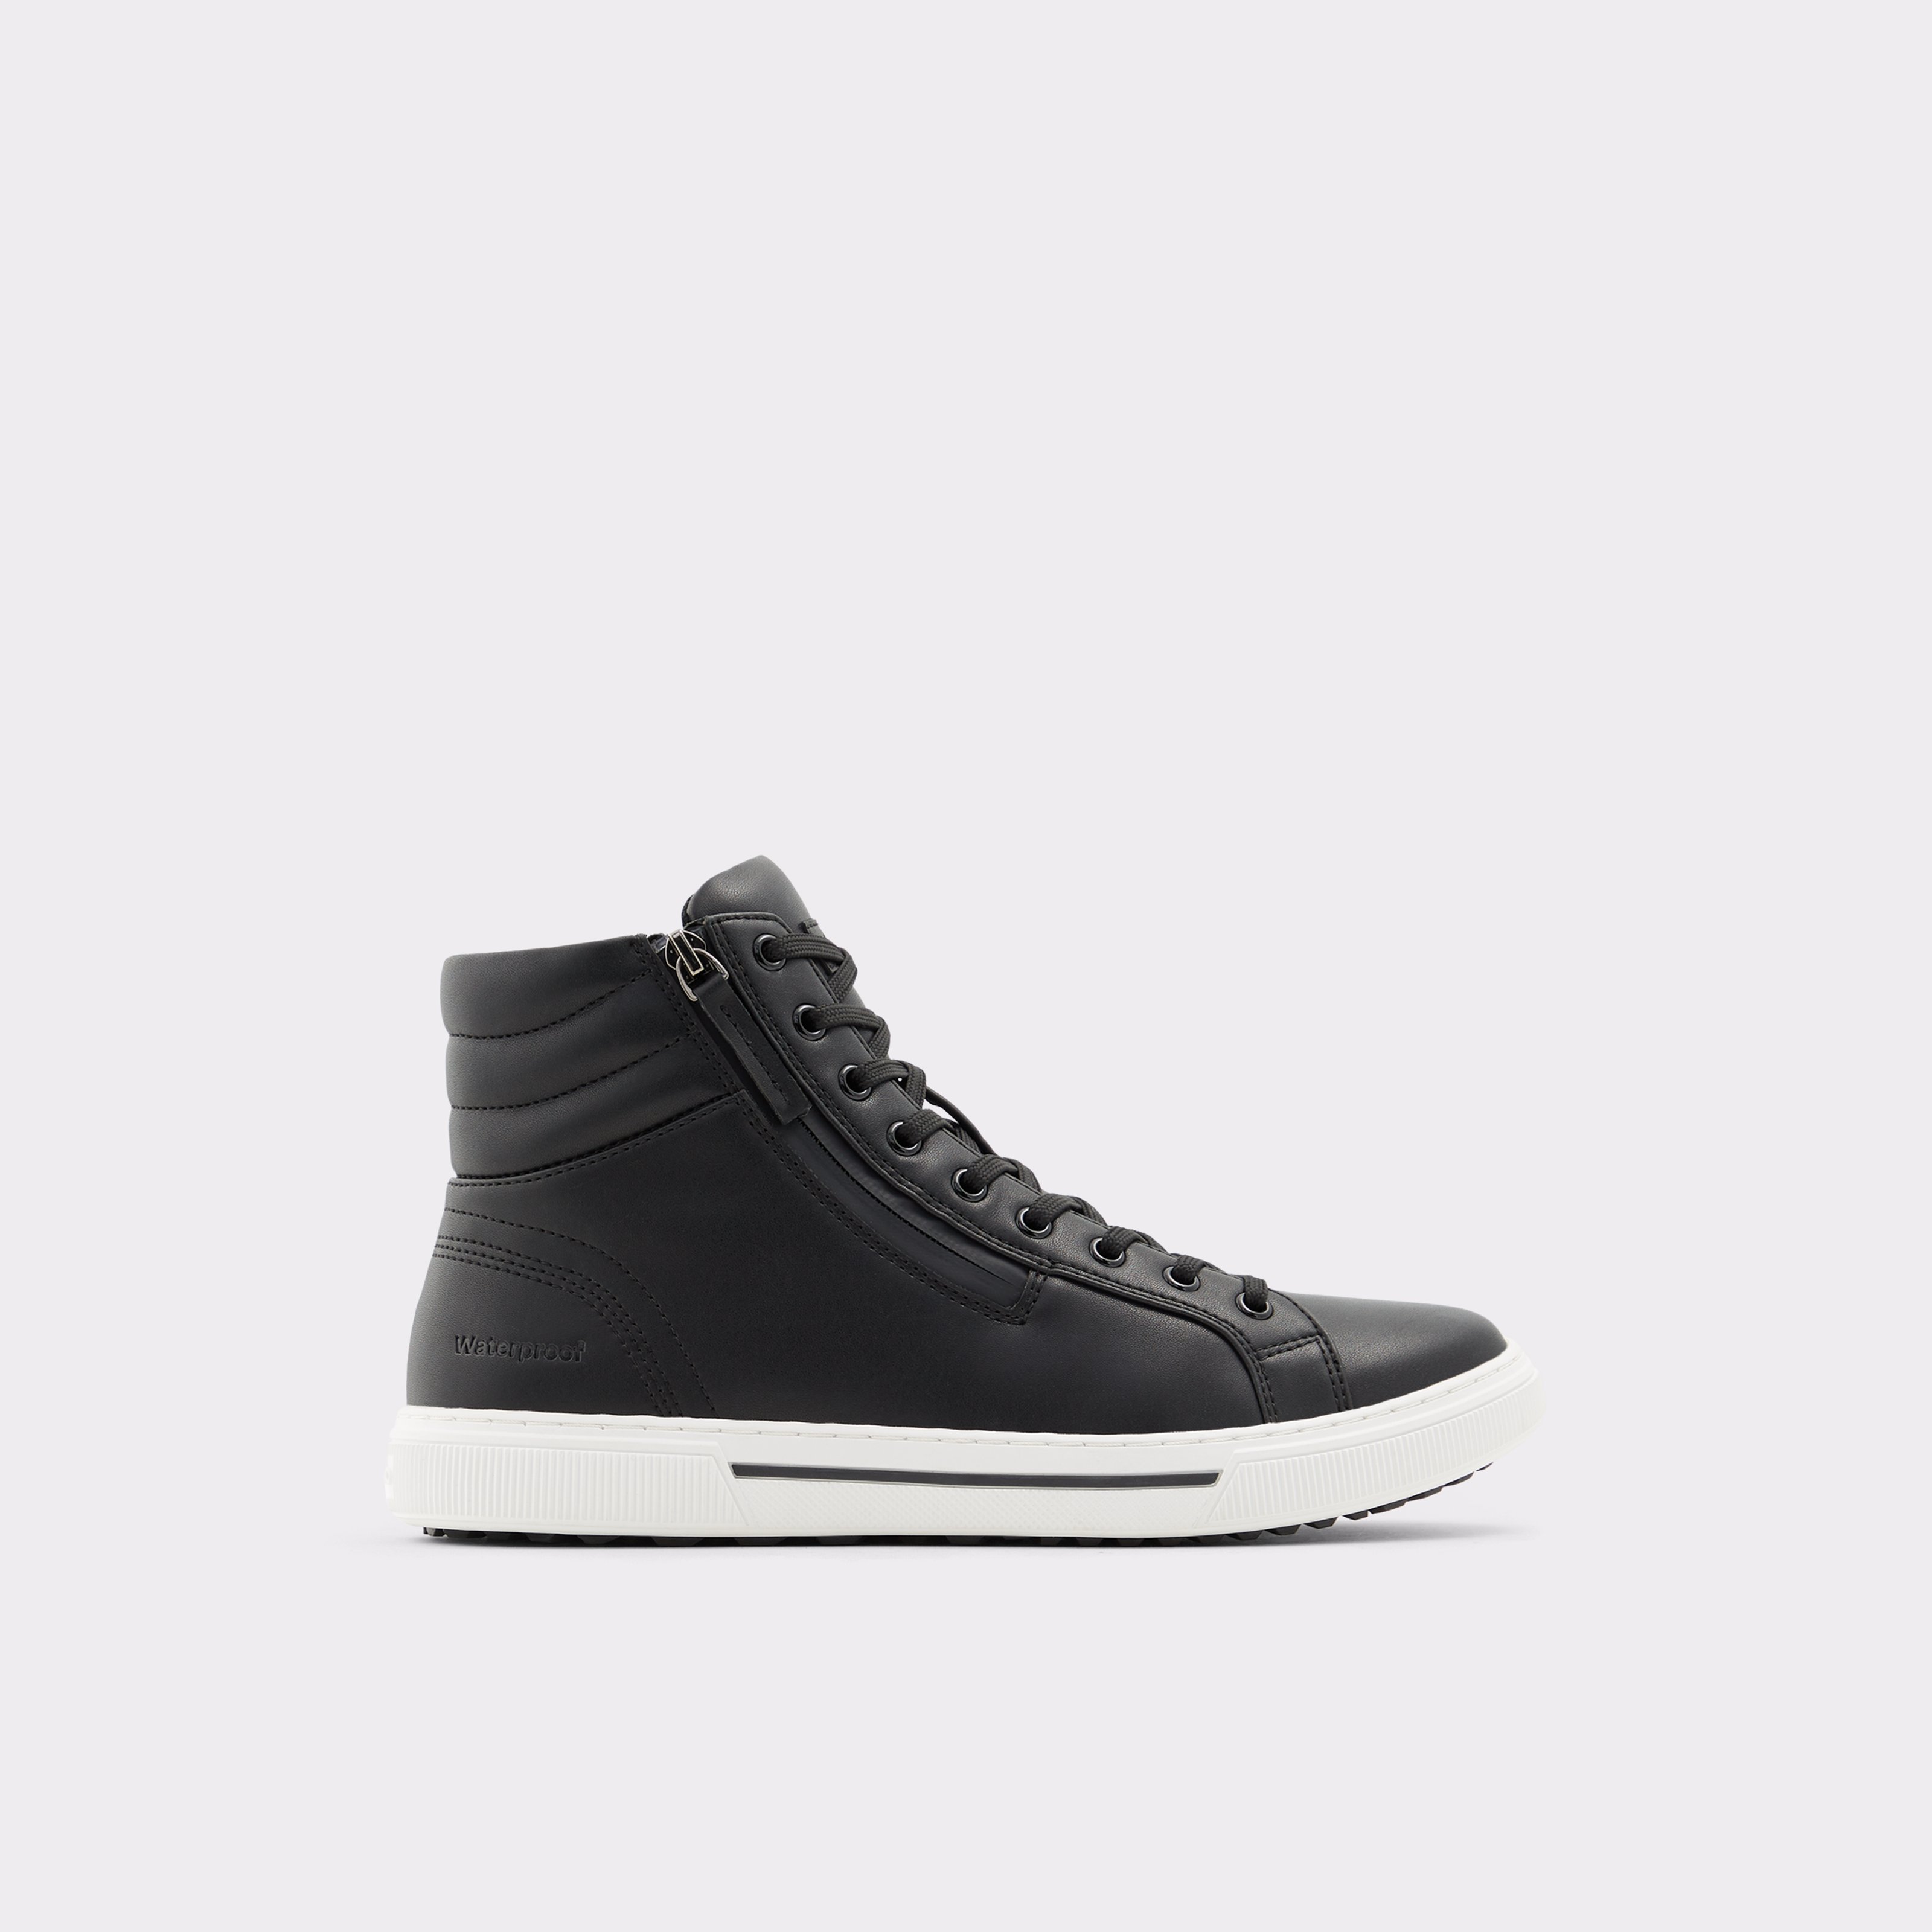 Preralith Other Black Synthetic Smooth Men's Lace-up boots | ALDO US